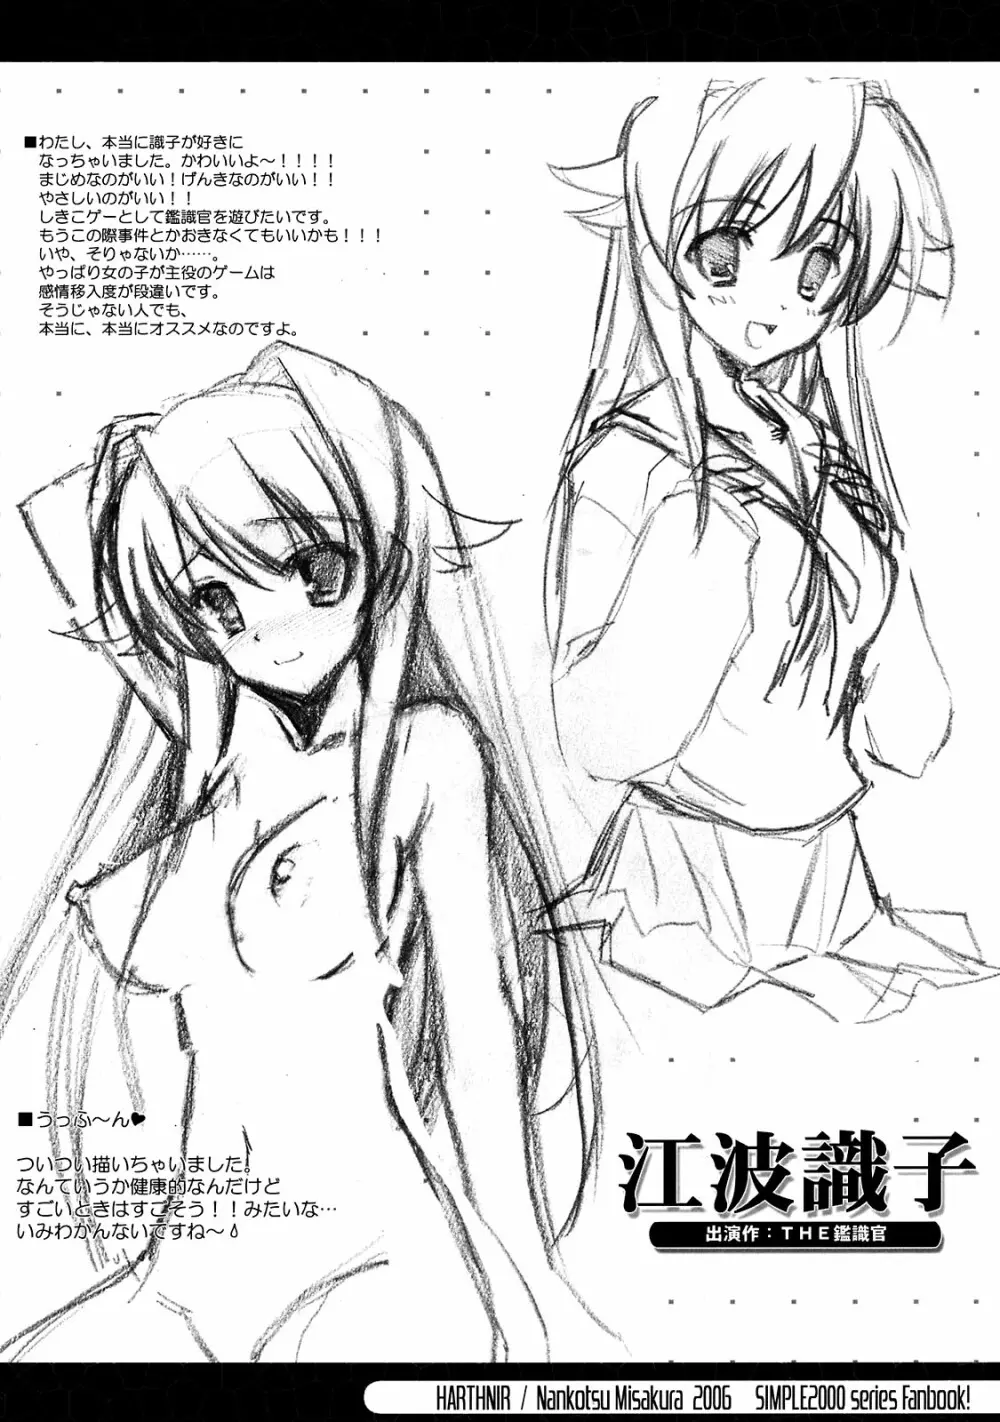 THE SIMPLE ギャル萌え同人誌 Illustration Side - page20